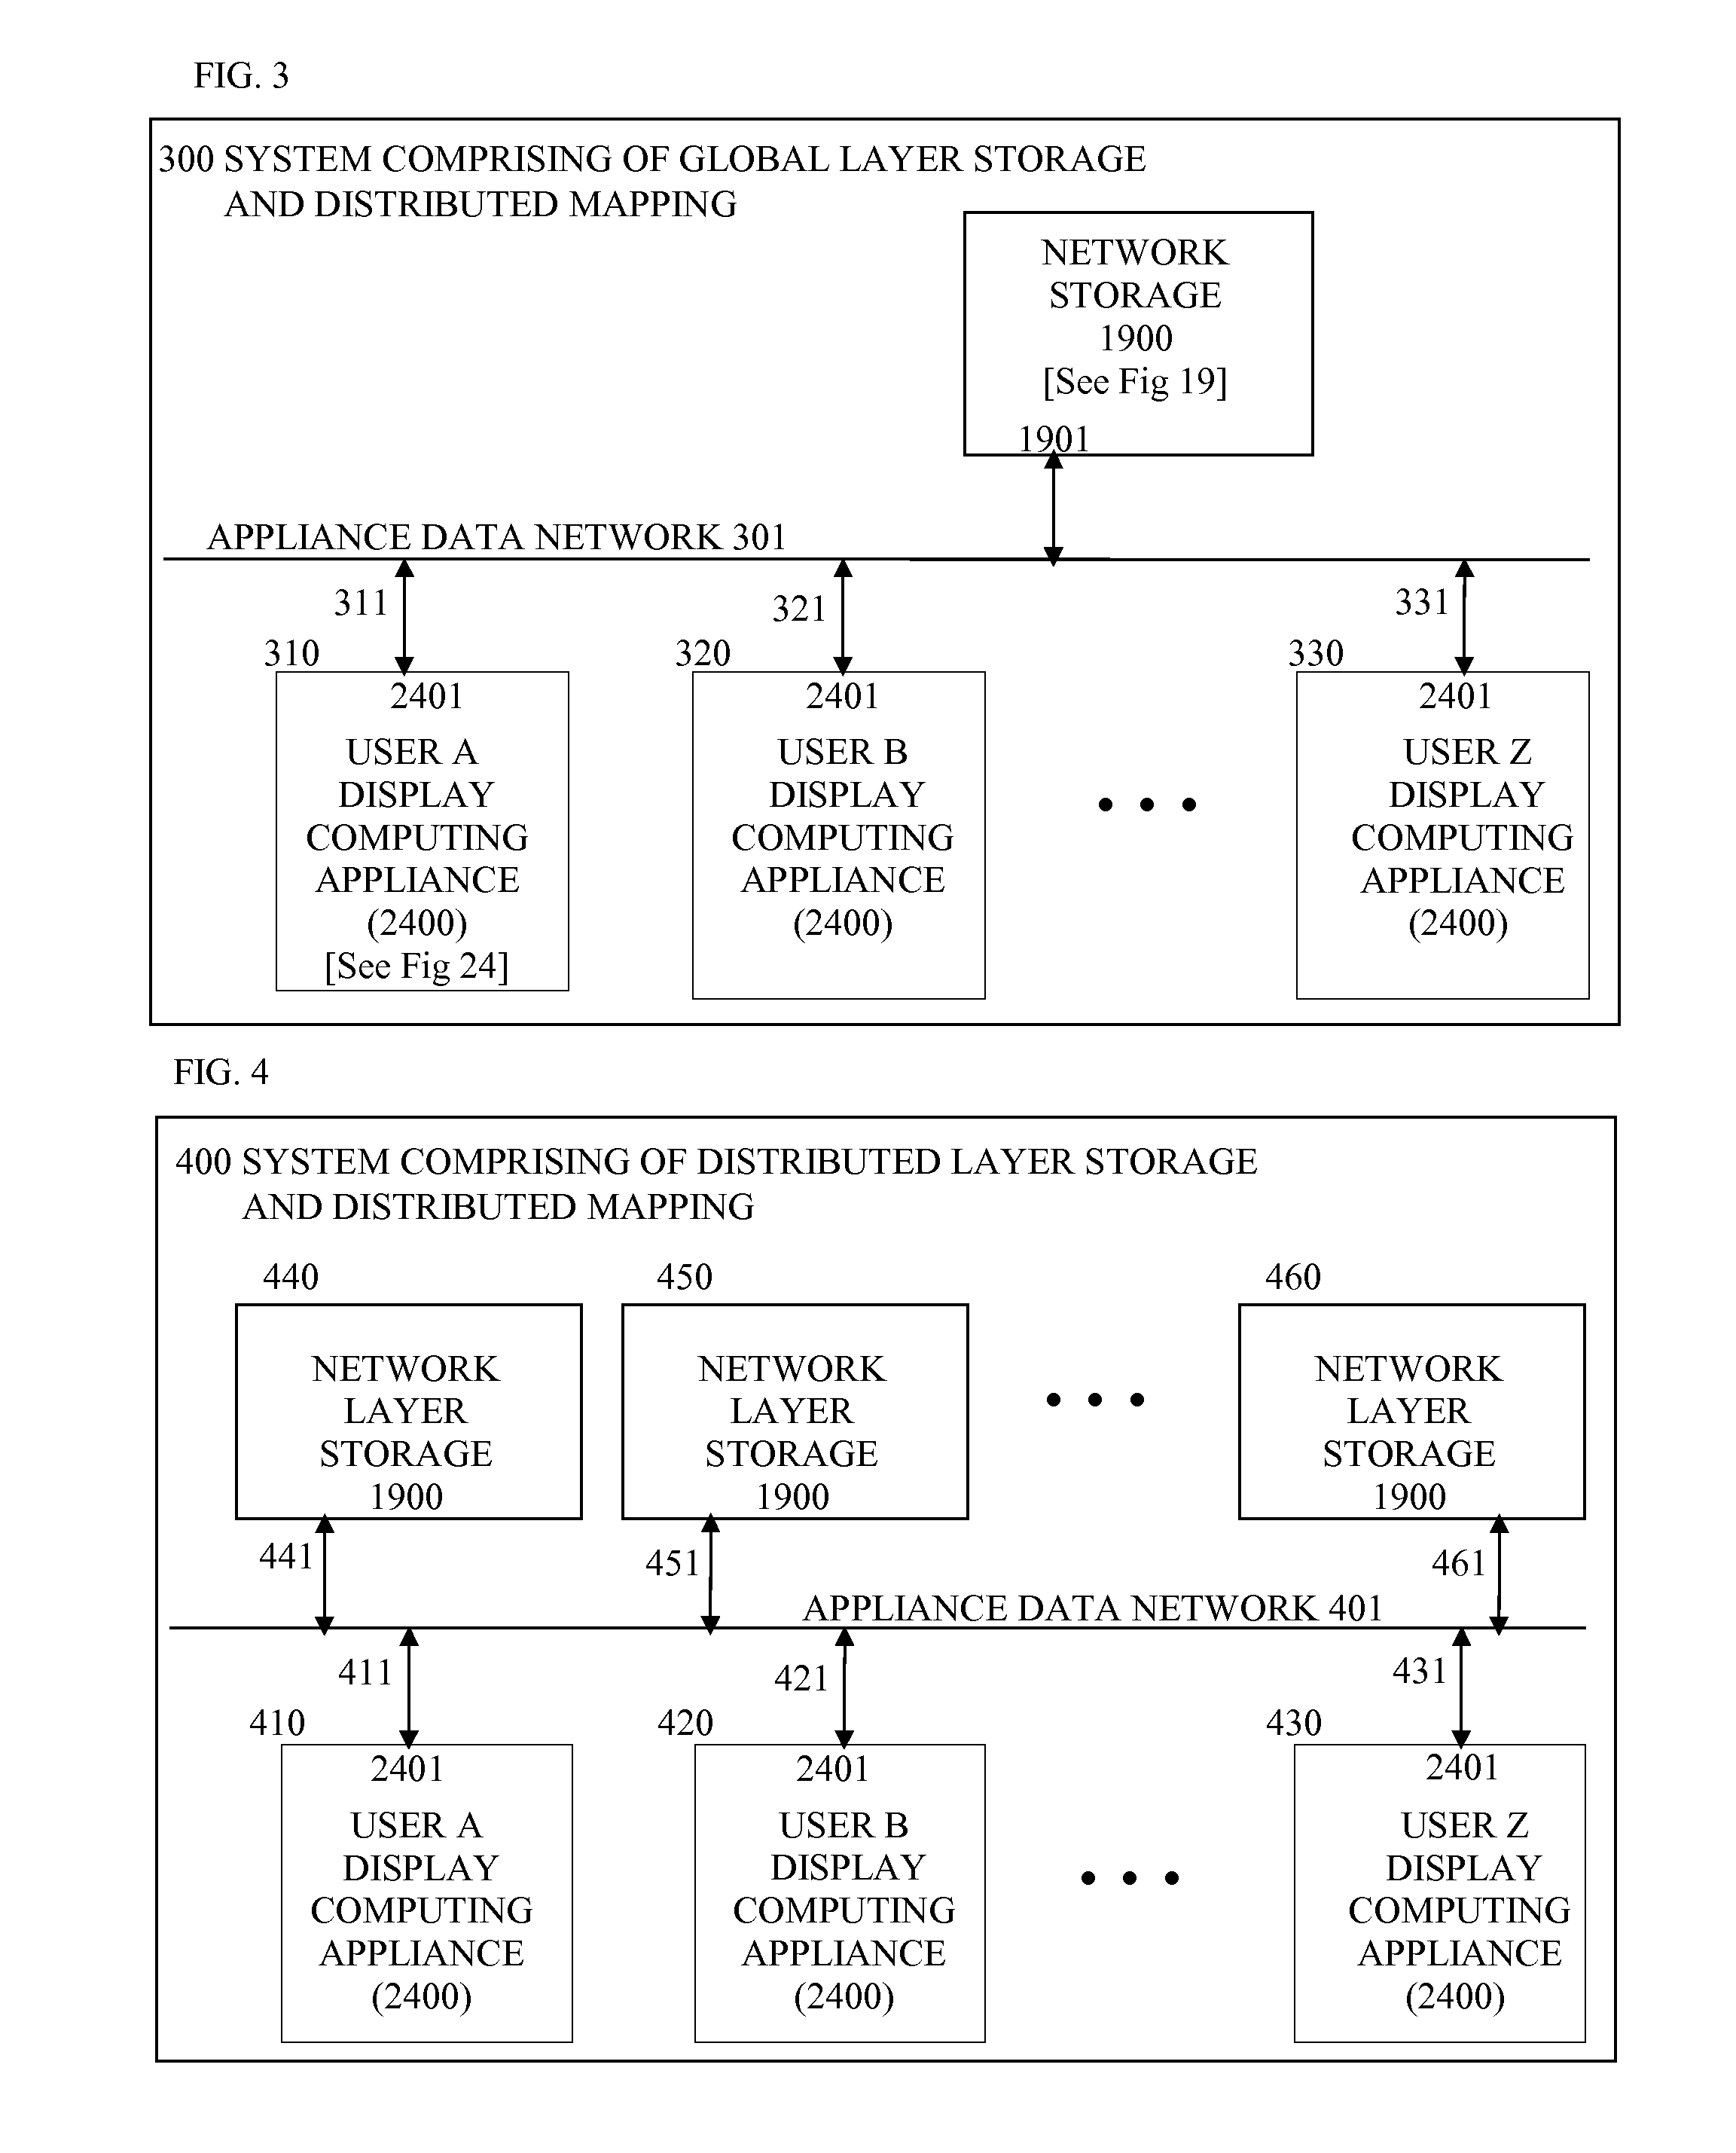 Systems And Methods Providing Collaborating Among A Plurality Of Users Each At A Respective Computing Appliance, And Providing Storage In Respective Data Layers Of Respective User Data, Provided Responsive To A Respective User Input, And Utilizing Event Processing Of Event Content Stored In The Data Layers